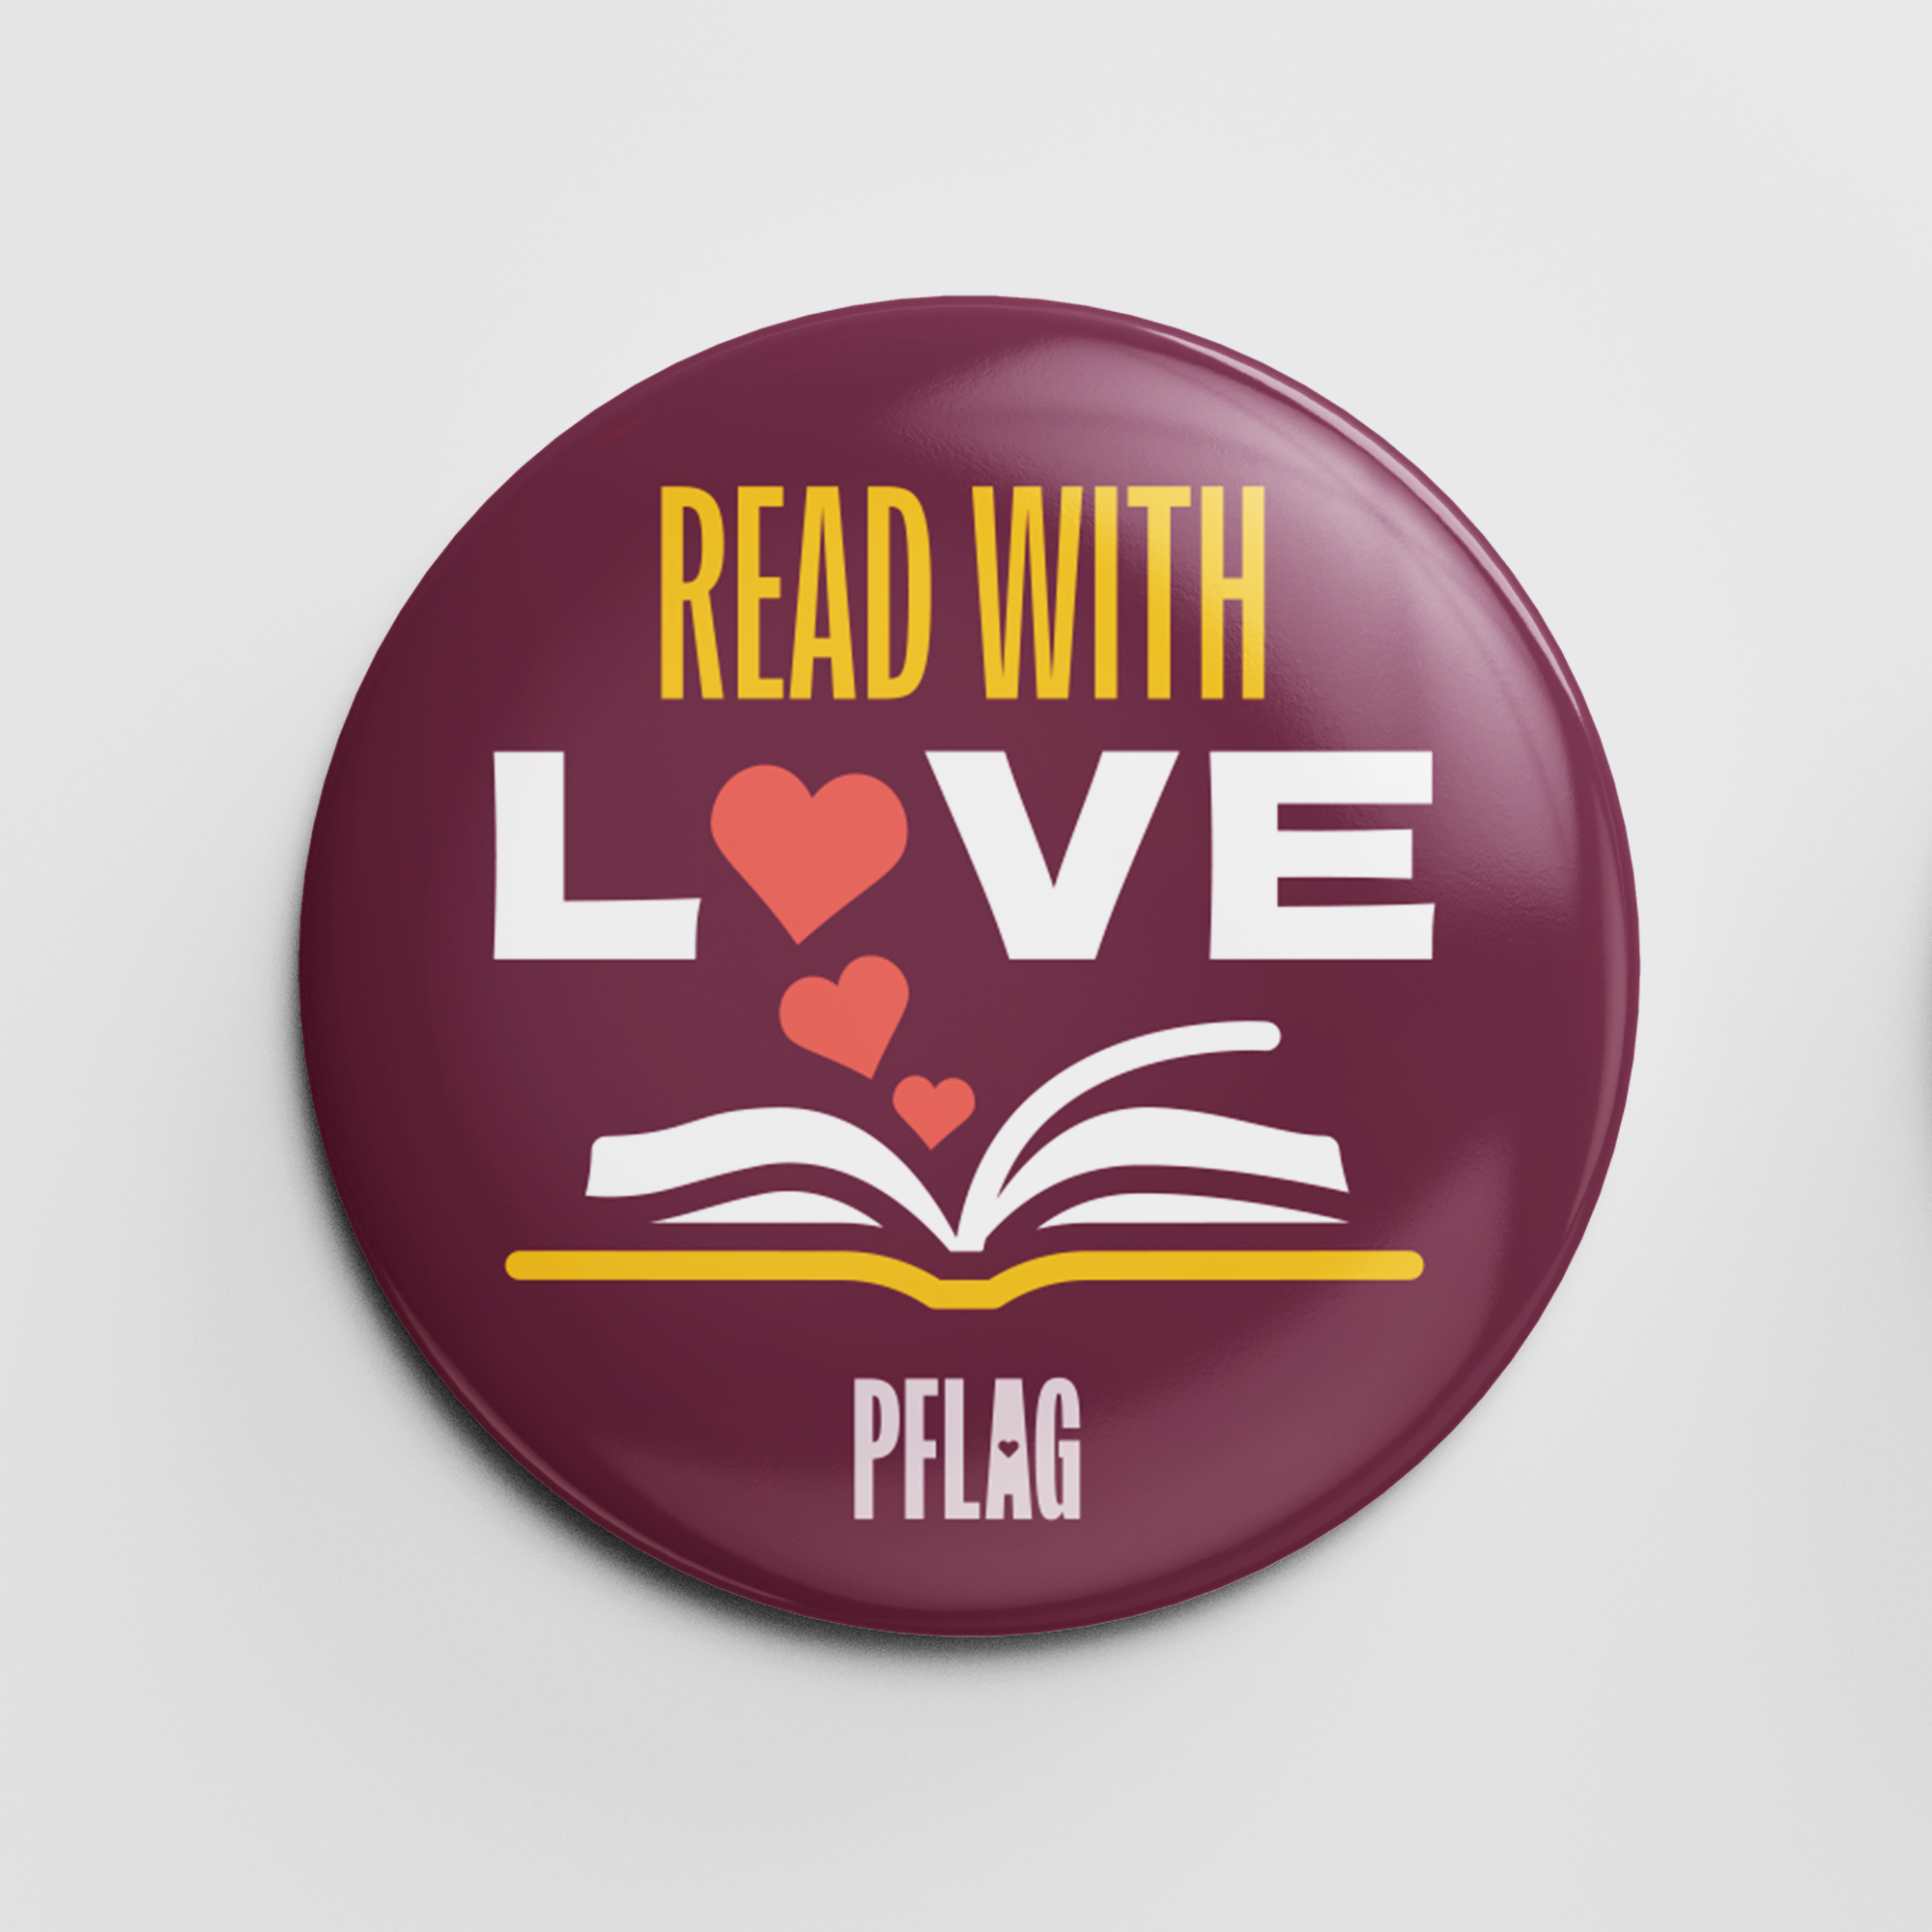 PFLAG Read With Love Buttons